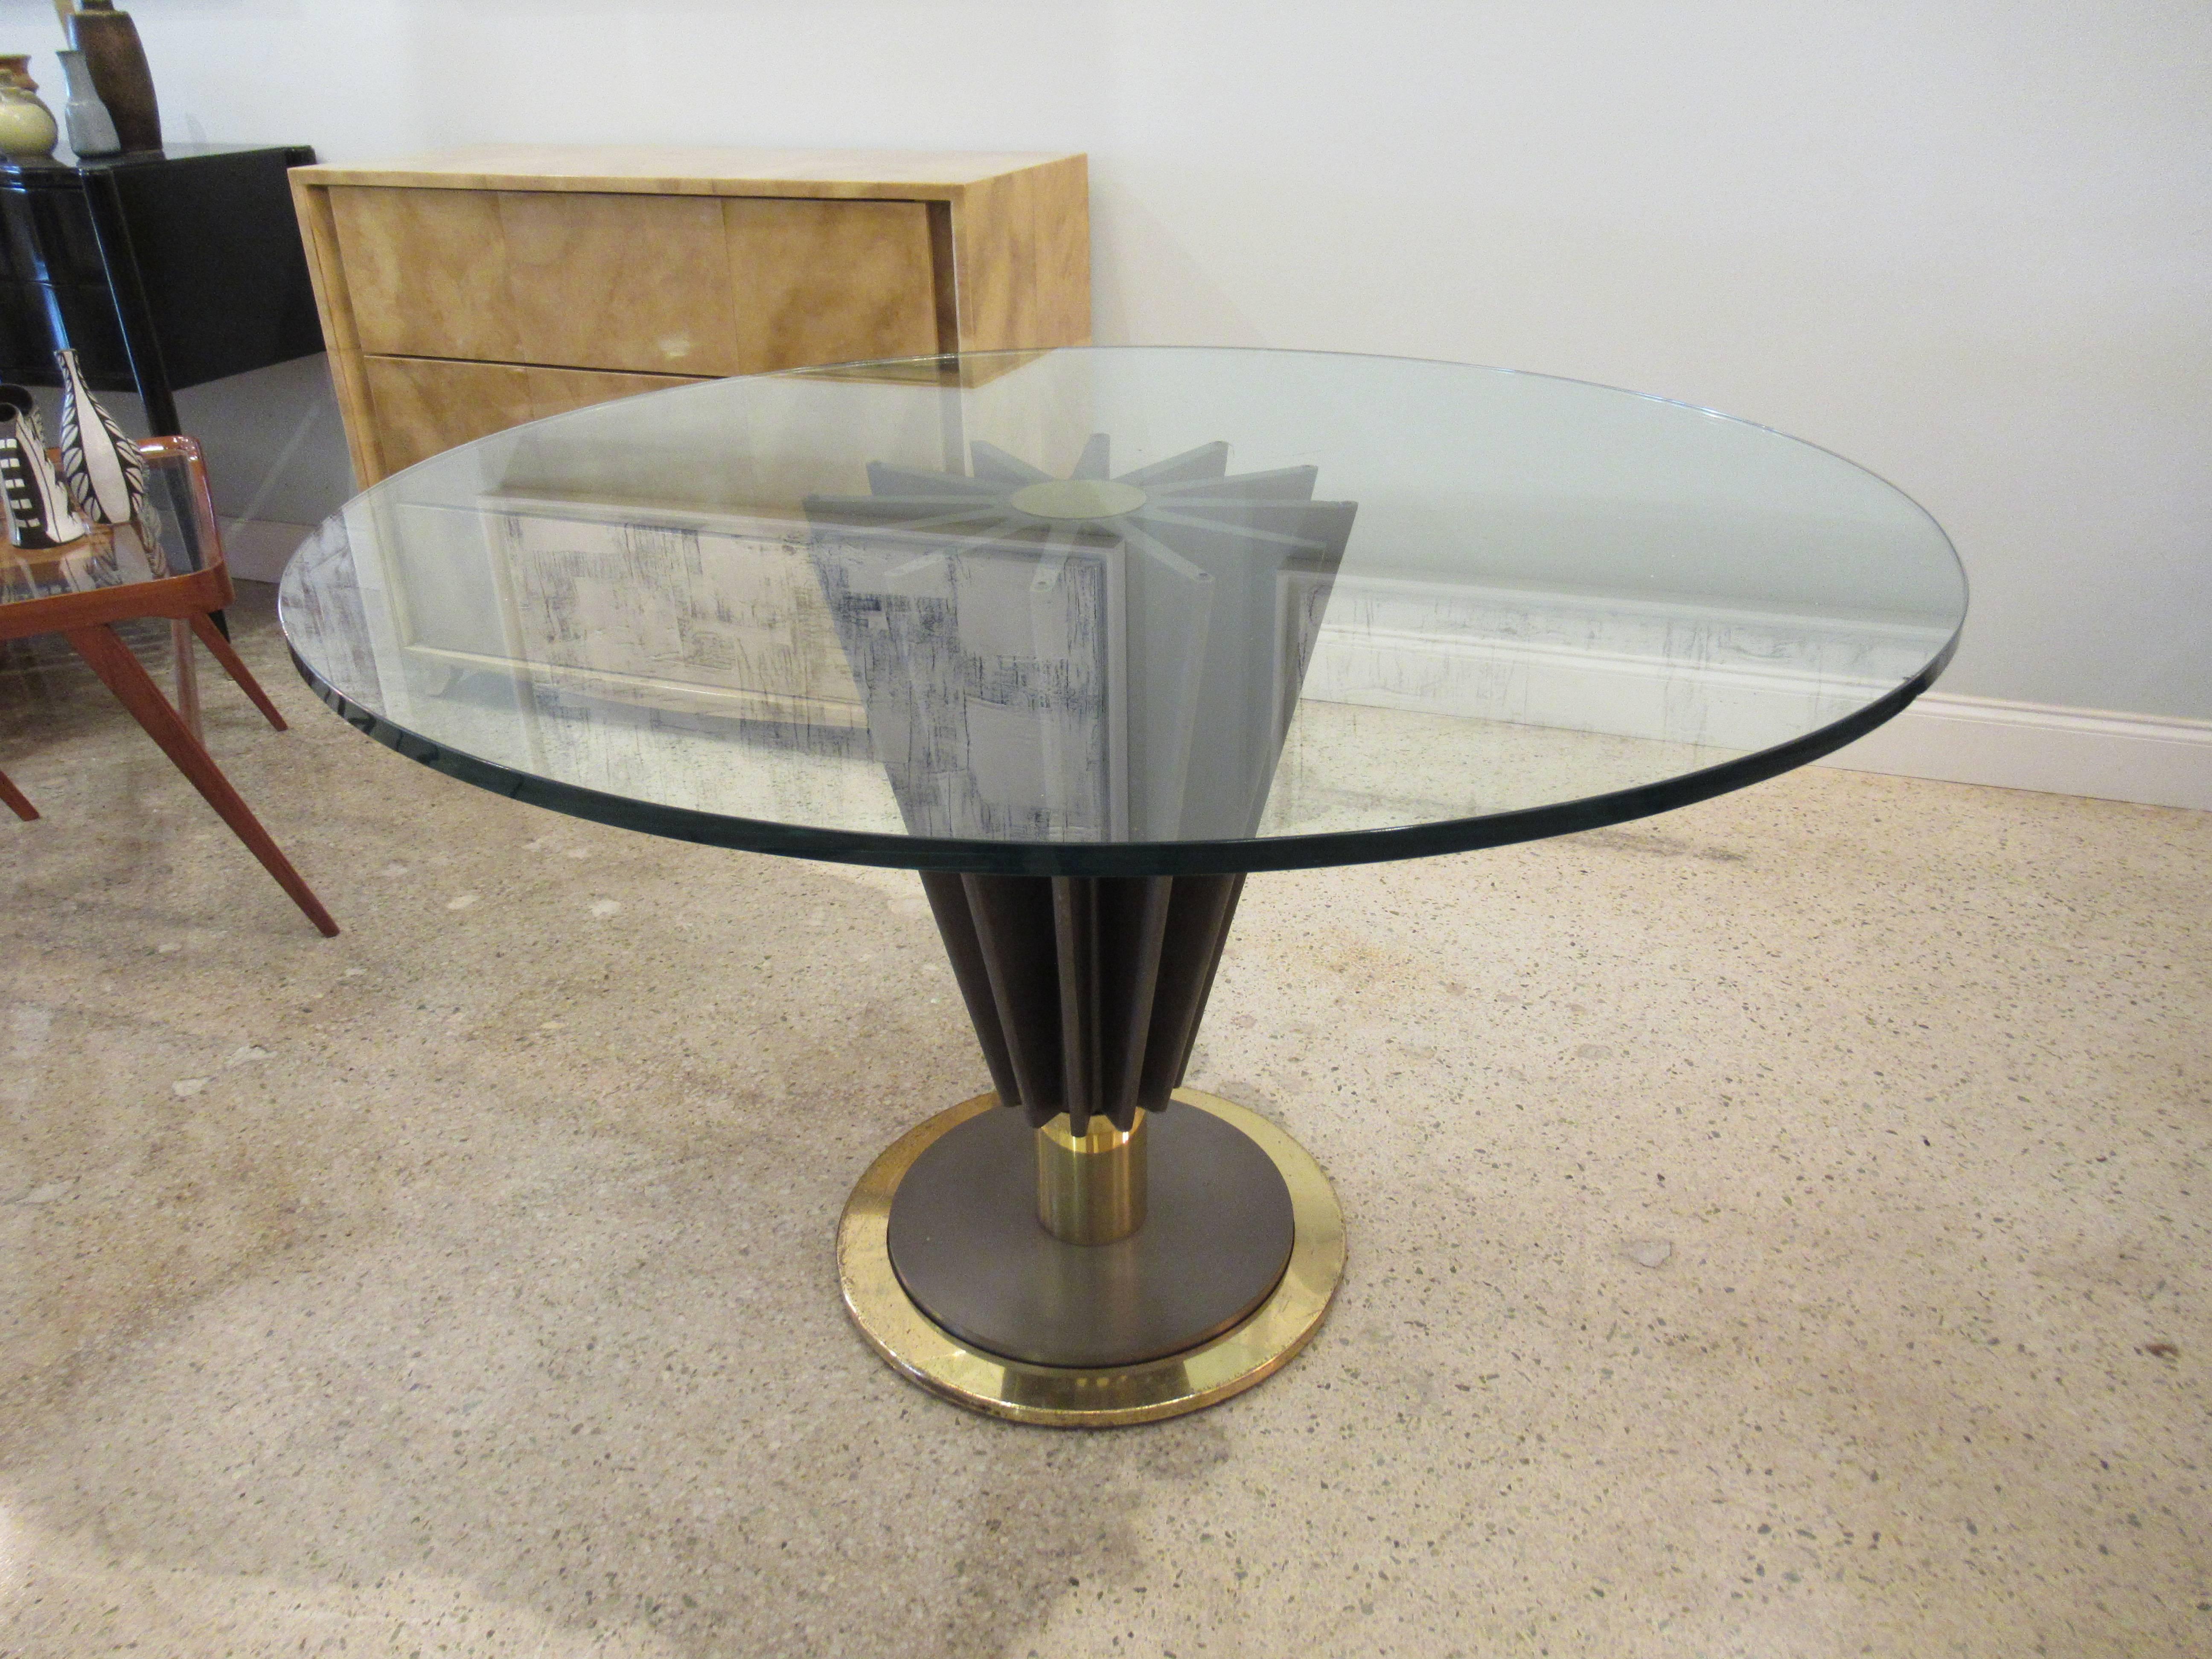 The glass top above a central brass medallion with signature Pierre Cardin, and radiation tapering steel fins, terminating with a cylinder, on a circular chrome and brass base.
The glass top can be from 36